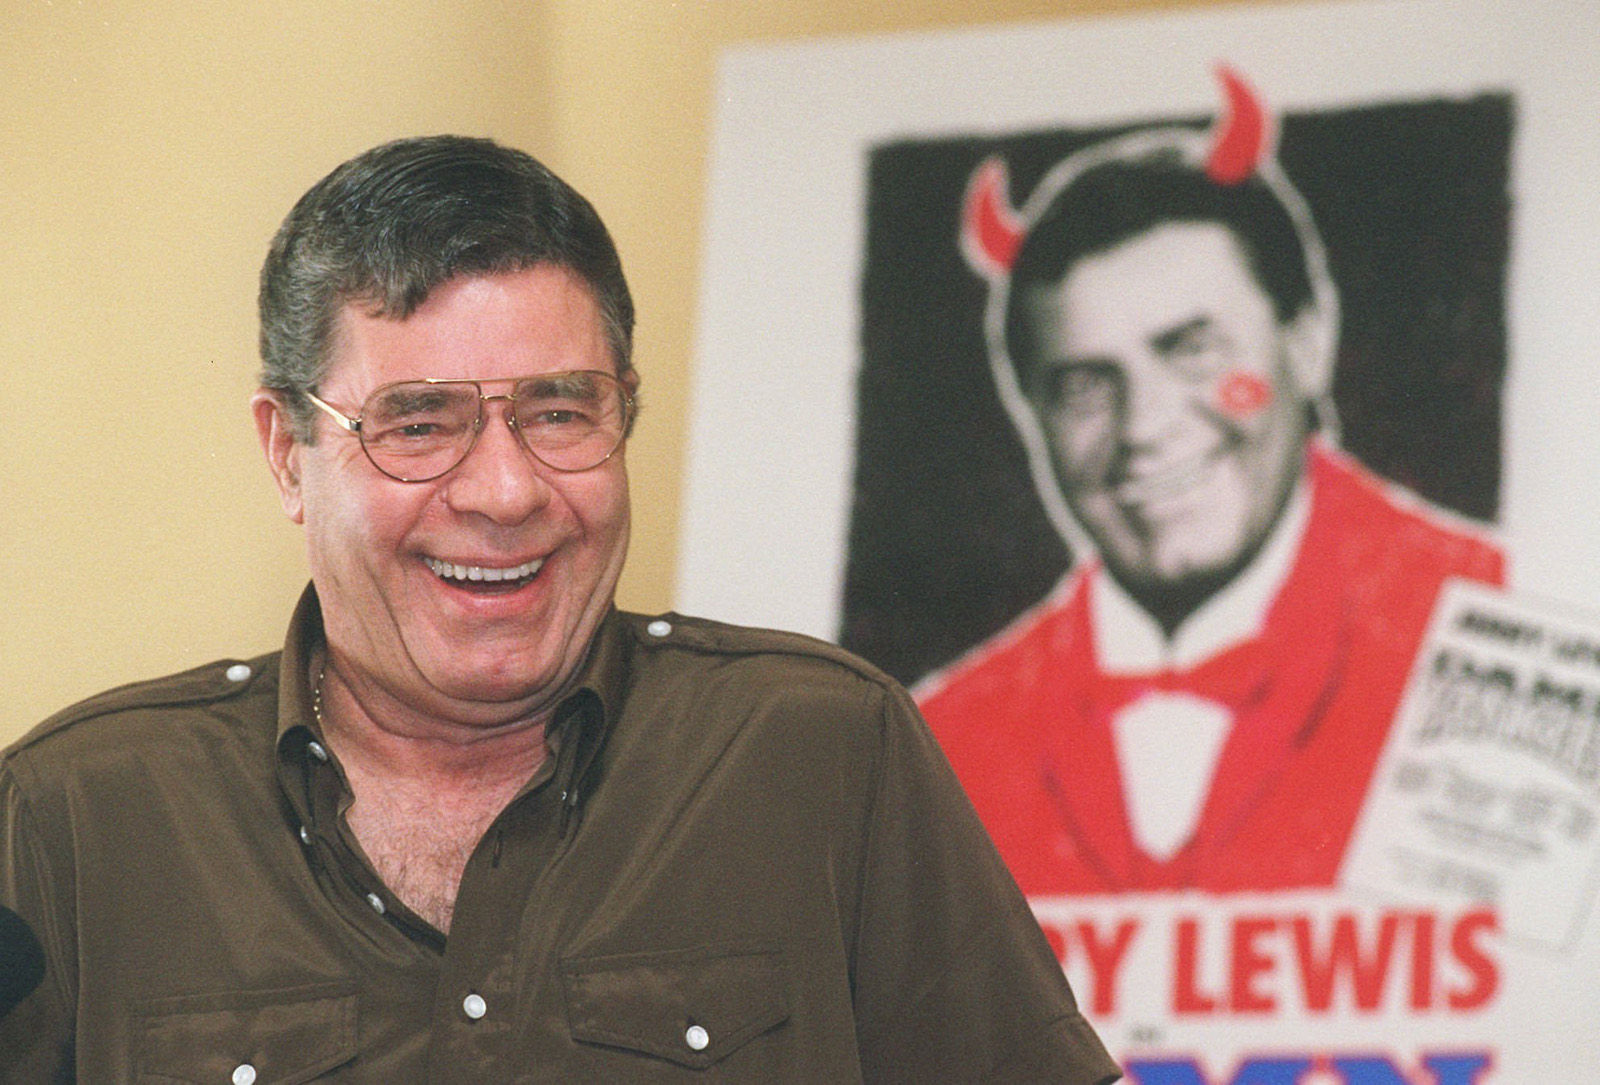 Entertainer Jerry Lewis laughs as he fields questions from the media at the  Ritz-Carlton Hotel in Pasadena, Calif., Tuesday, Nov. 28, 1995. Lewis is starring in the nationally touring production of the Broadway musical "Damn Yankees," which comes to the Pasadena Civic Auditorium for eight performances starting Nov. 28. (AP Photo/Chris Pizzello)